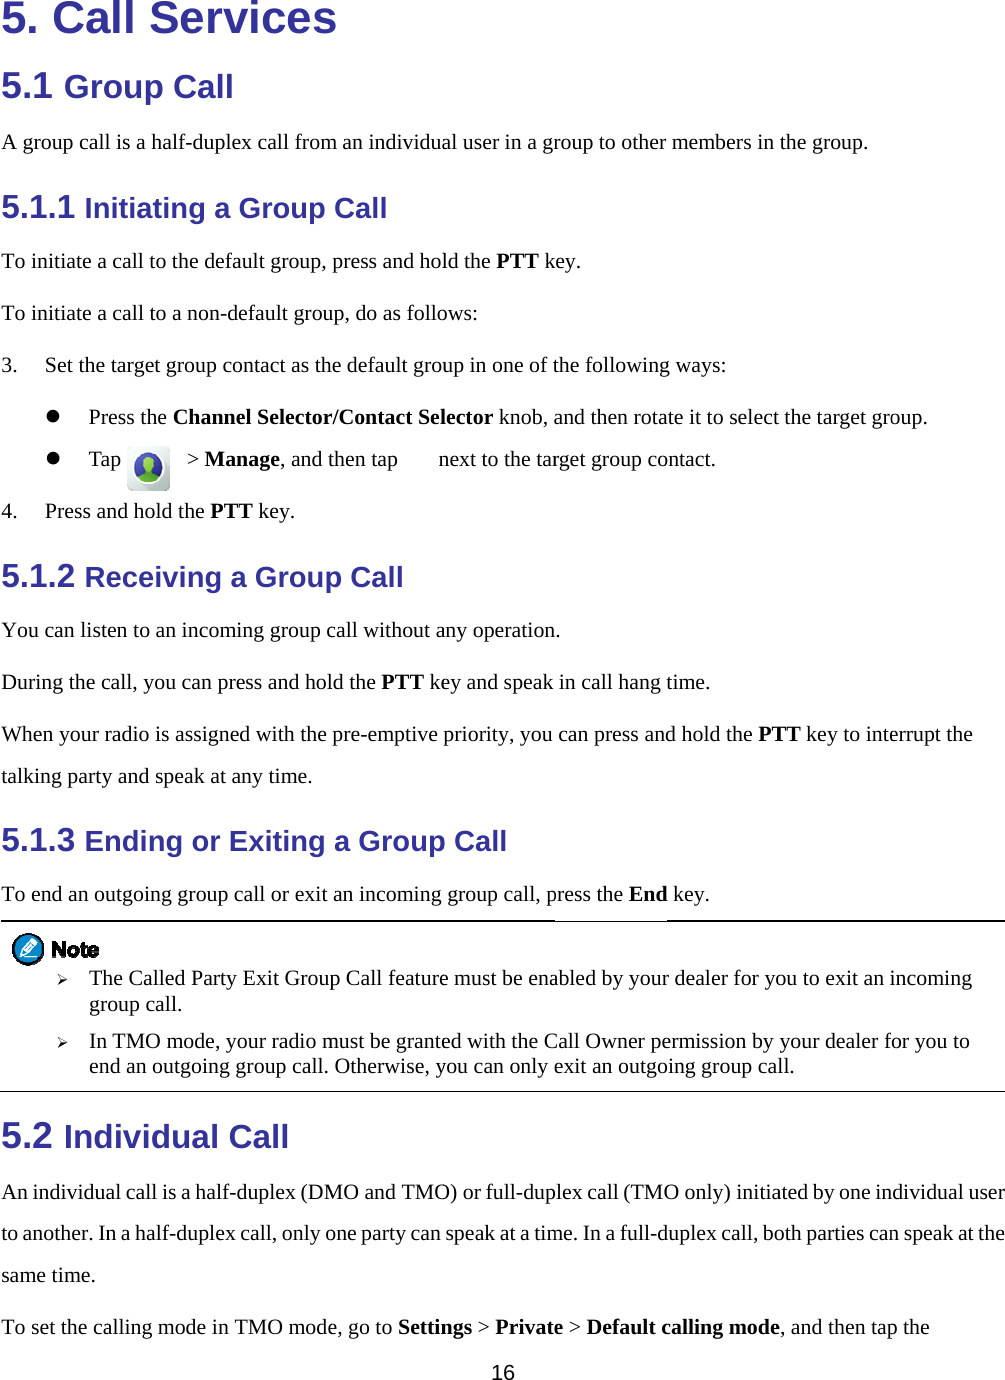    5. Ca5.1 GroA group call5.1.1 InTo initiate a To initiate a 3. Set the z Prz Ta4. Press an5.1.2 ReYou can listDuring the cWhen your rtalking party5.1.3 EnTo end an ou ¾ Thgr¾ Inen5.2 IndAn individuato another. Insame time. To set the caall Seroup Call is a half-dupnitiating a call to the de call to a nontarget group ress the Chanap      &gt; Mnd hold the Peceivingten to an incocall, you can pradio is assigny and speak anding orutgoing grouphe Called Parroup call. n TMO mode,nd an outgoindividualal call is a haln a half-duplealling mode inrvicesll plex call froma Group efault group, n-default groucontact as thnnel SelectorManage, and tPTT key. g a Groupming group cpress and holned with the at any time. r Exiting p call or exit rty Exit Group, your radio mg group call.  Call lf-duplex (DMex call, only on TMO modes m an individuaCall press and holup, do as follohe default grour/Contact Selthen tap   np Call call without ald the PTT kepre-emptive a Groupan incoming p Call featuremust be granteOtherwise, yMO and TMOone party can e, go to Settin16 al user in a grld the PTT kows: up in one of tlector knob, anext to the tarany operationey and speak priority, you p Call group call, pe must be enaed with the Cyou can only eO) or full-dupspeak at a timngs &gt; Privateroup to other key. the followingand then rotarget group con. in call hang tcan press andpress the Endabled by yourCall Owner peexit an outgoplex call (TMOme. In a full-de &gt; Default cmembers in g ways:   ate it to select ontact. time. d hold the PTd key. r dealer for yoermission by oing group calO only) initiaduplex call, bocalling modethe group. t the target groTT key to inteou to exit an iyour dealer fll. ated by one inoth parties cane, and then tapoup. errupt the incoming for you to ndividual usern speak at thep the r e 